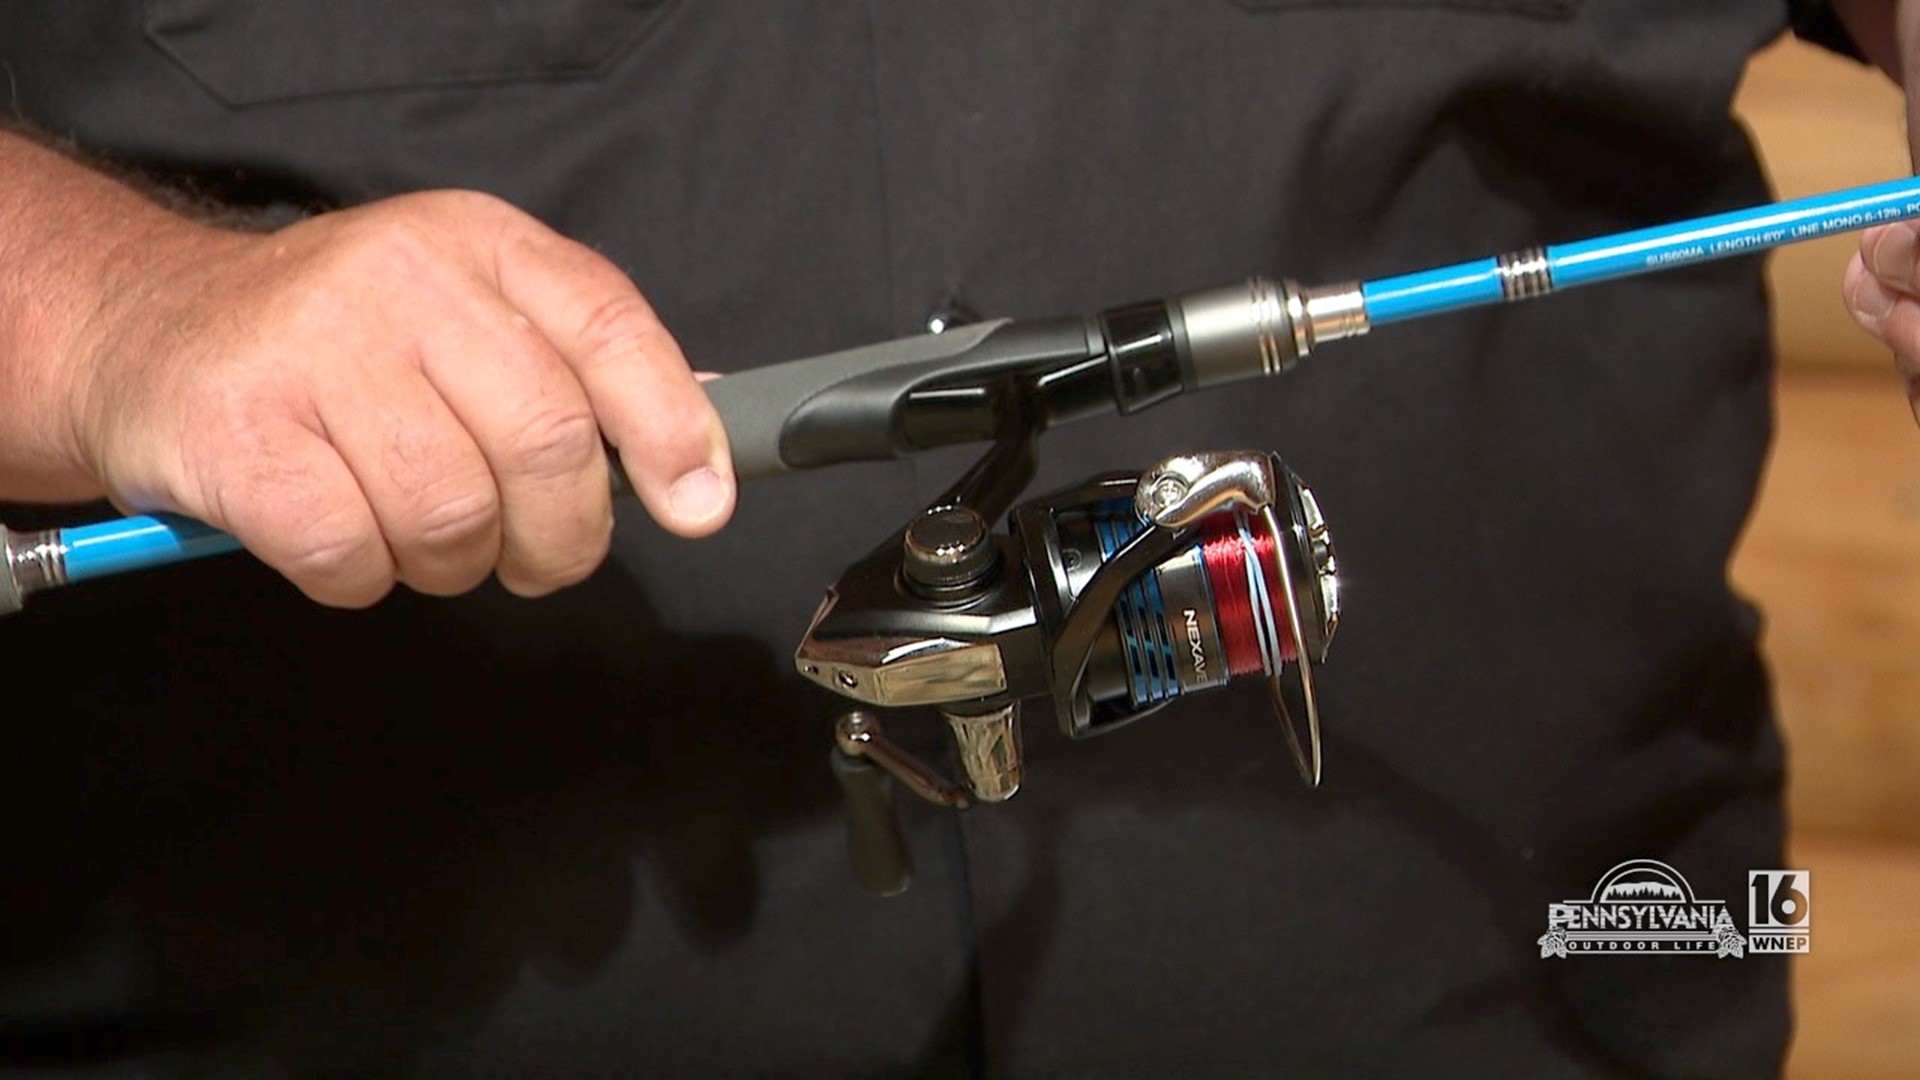 An awesome rod and reel combo from Shimano.